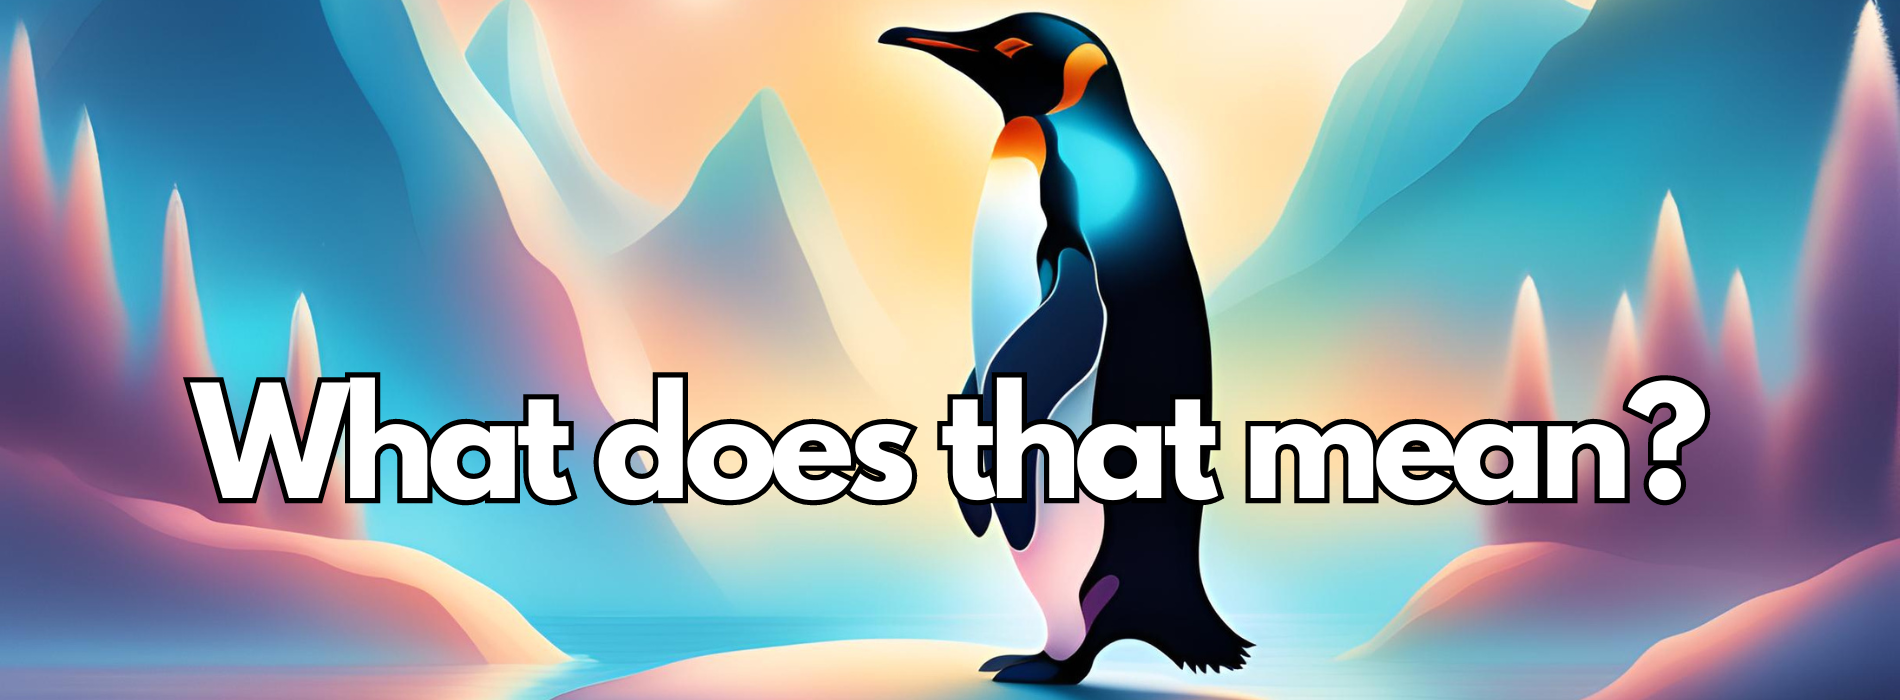 The Biblical meaning of a penguin in a dream